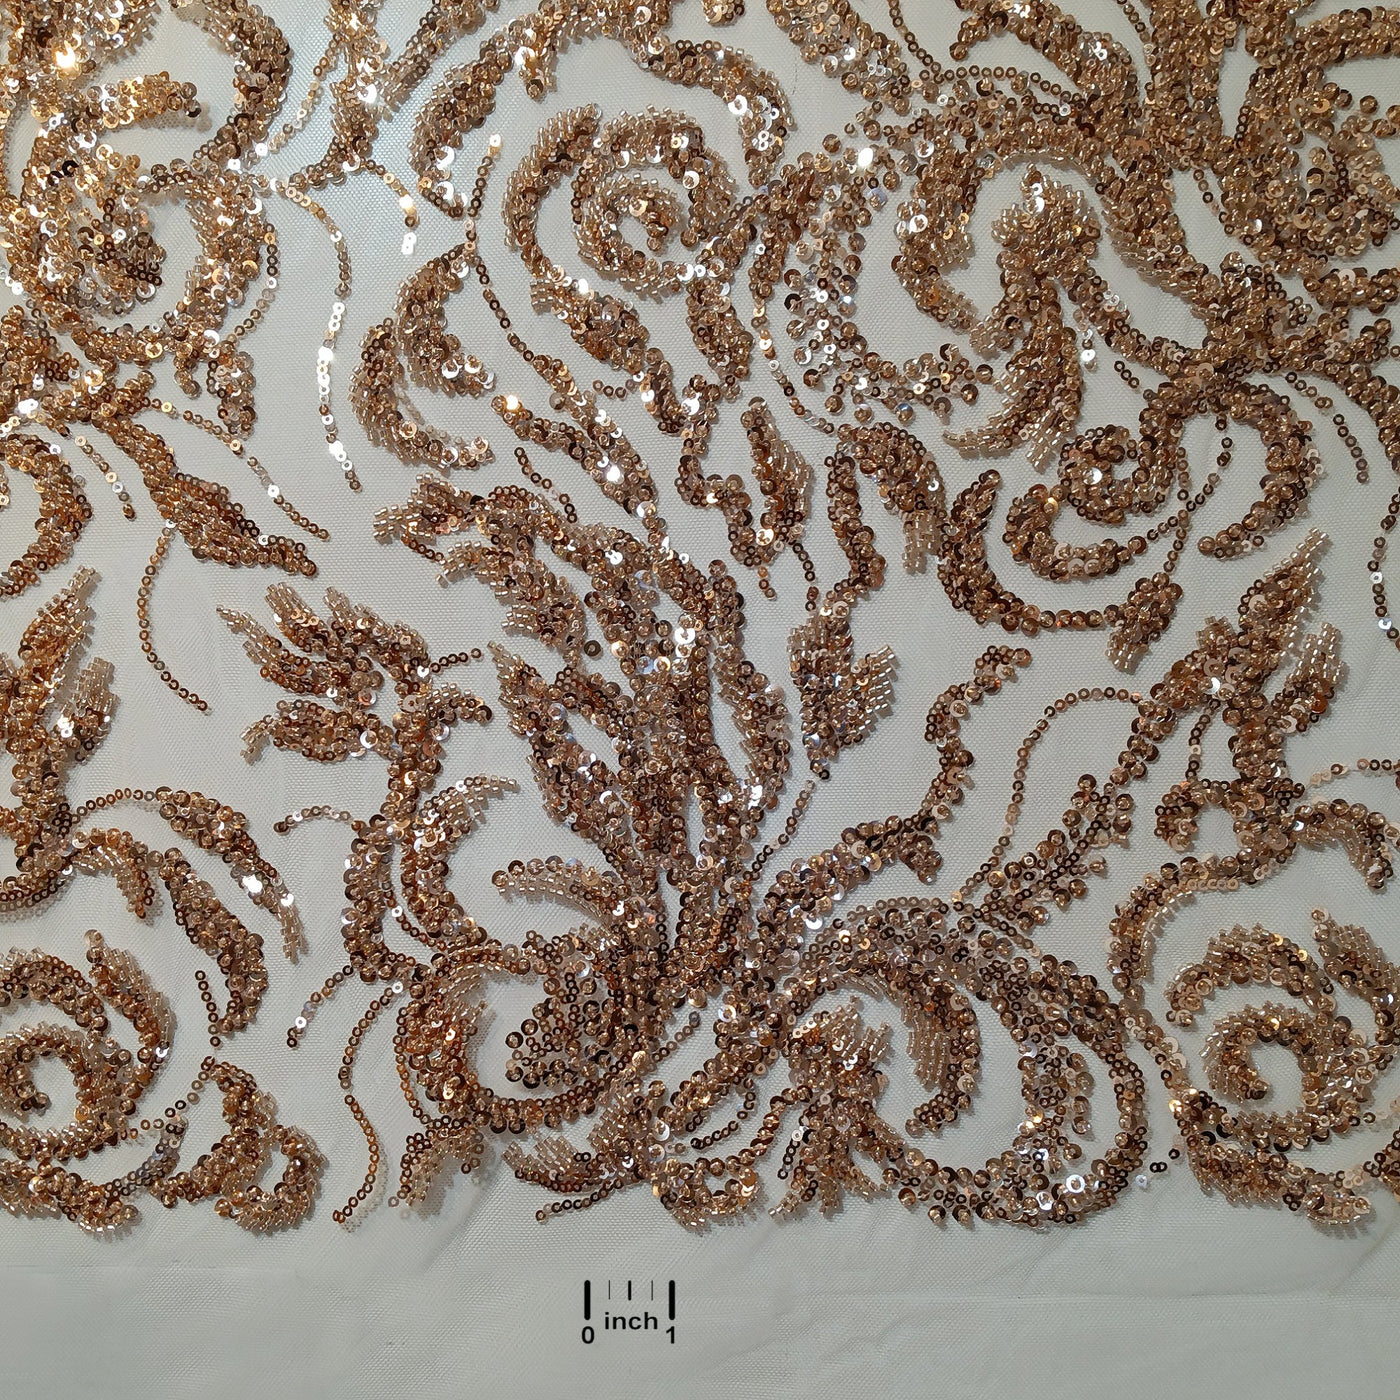 Beaded & Sequined Lace Fabric Embroidered on 100% Polyester Net Mesh | Lace USA - GD-30 Rose Gold